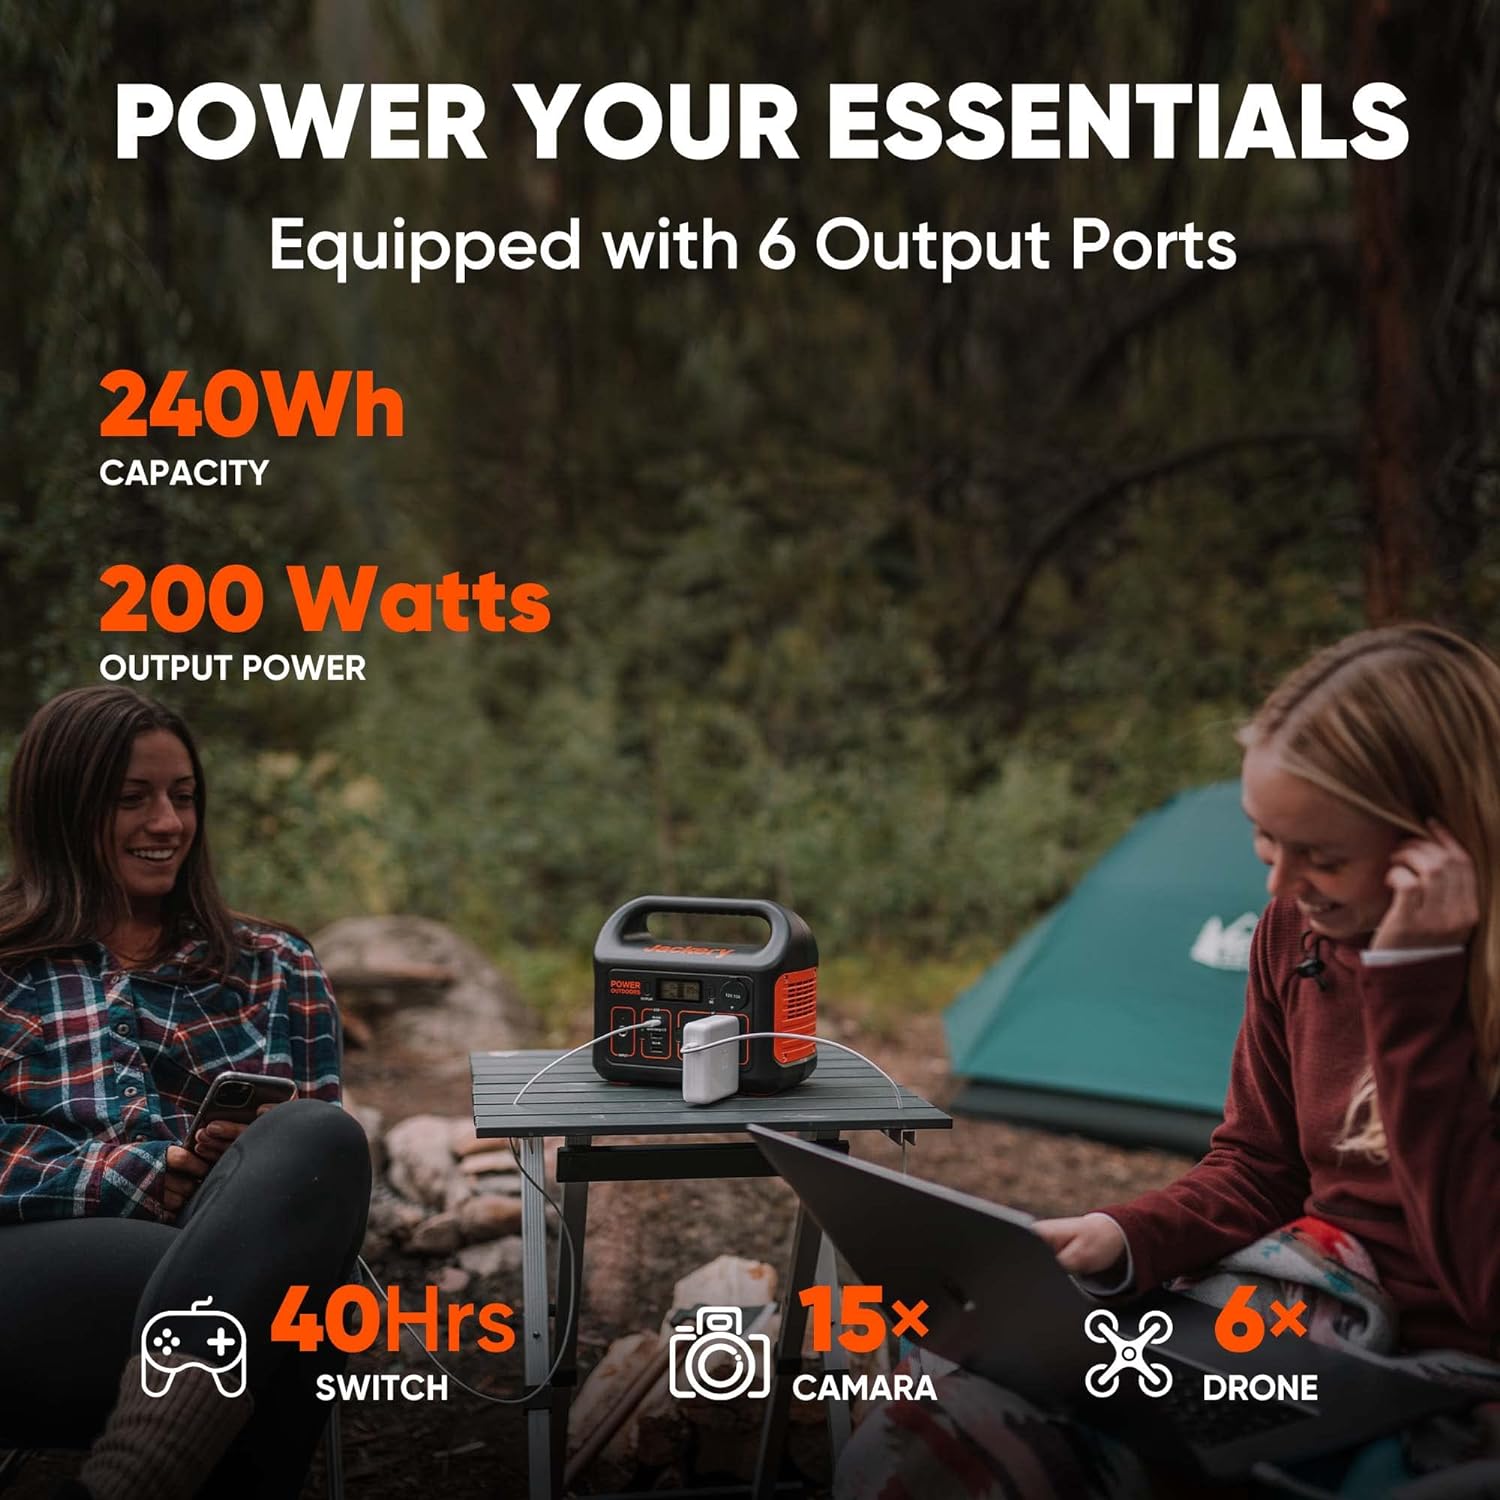 Jackery Explorer 300 Plus Portable Power Station, 288Wh Backup LiFePO4 Battery, 300W AC Outlet, 3.75 KG Solar Generator (Solar Panel Not Included) for RV, Outdoors, Camping, Traveling, and Emergencies (E300Plus)